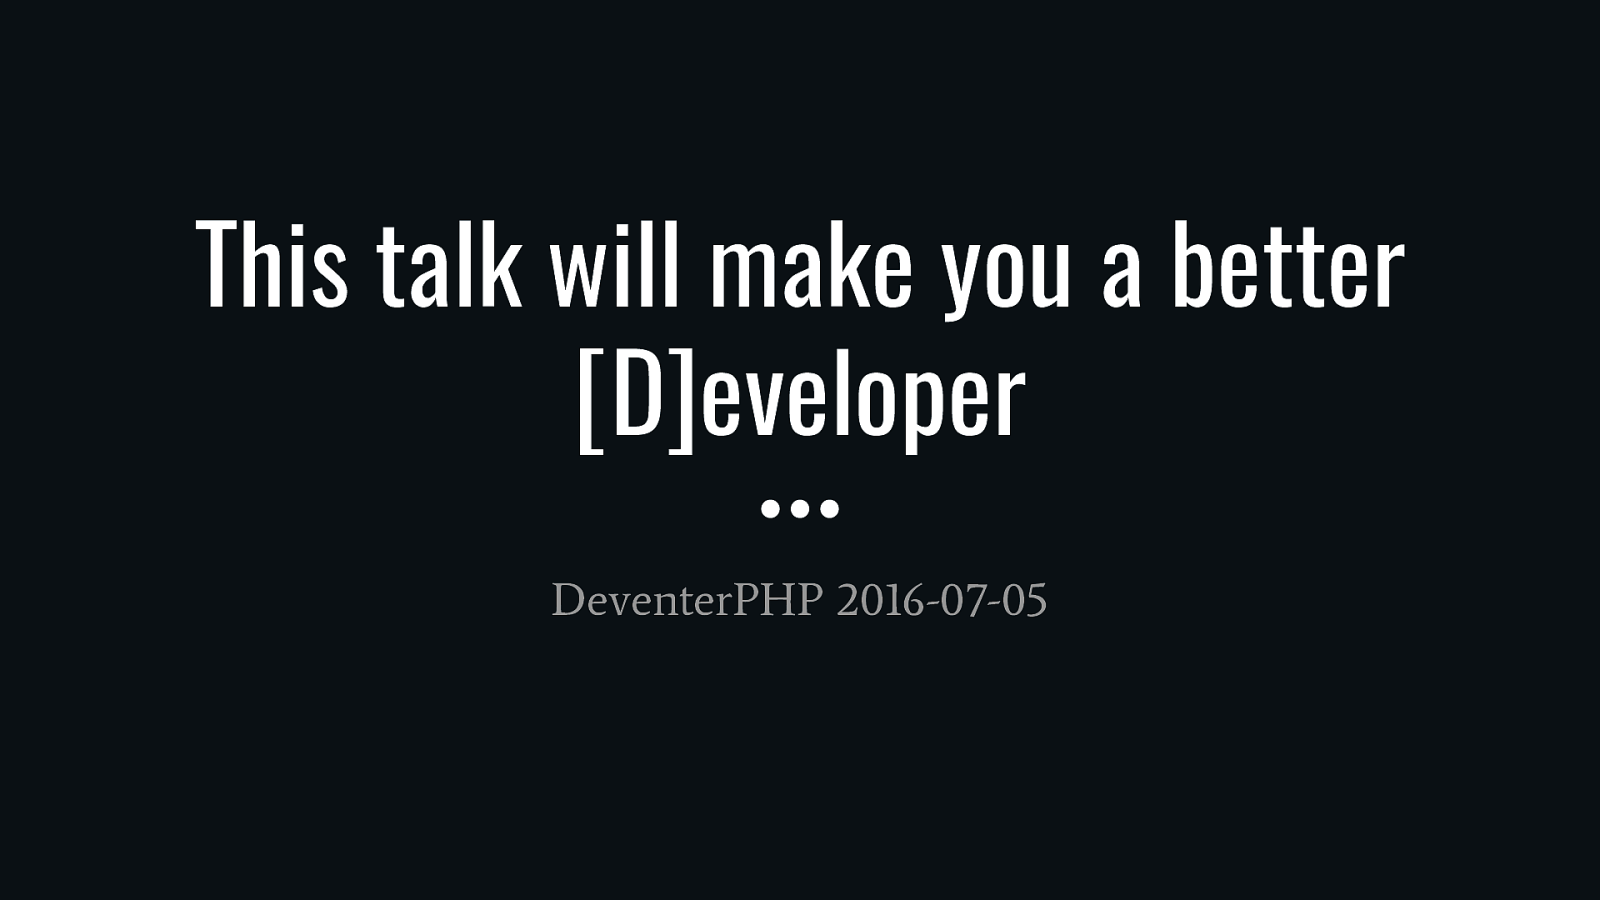 This talk will make you a better [D]eveloper